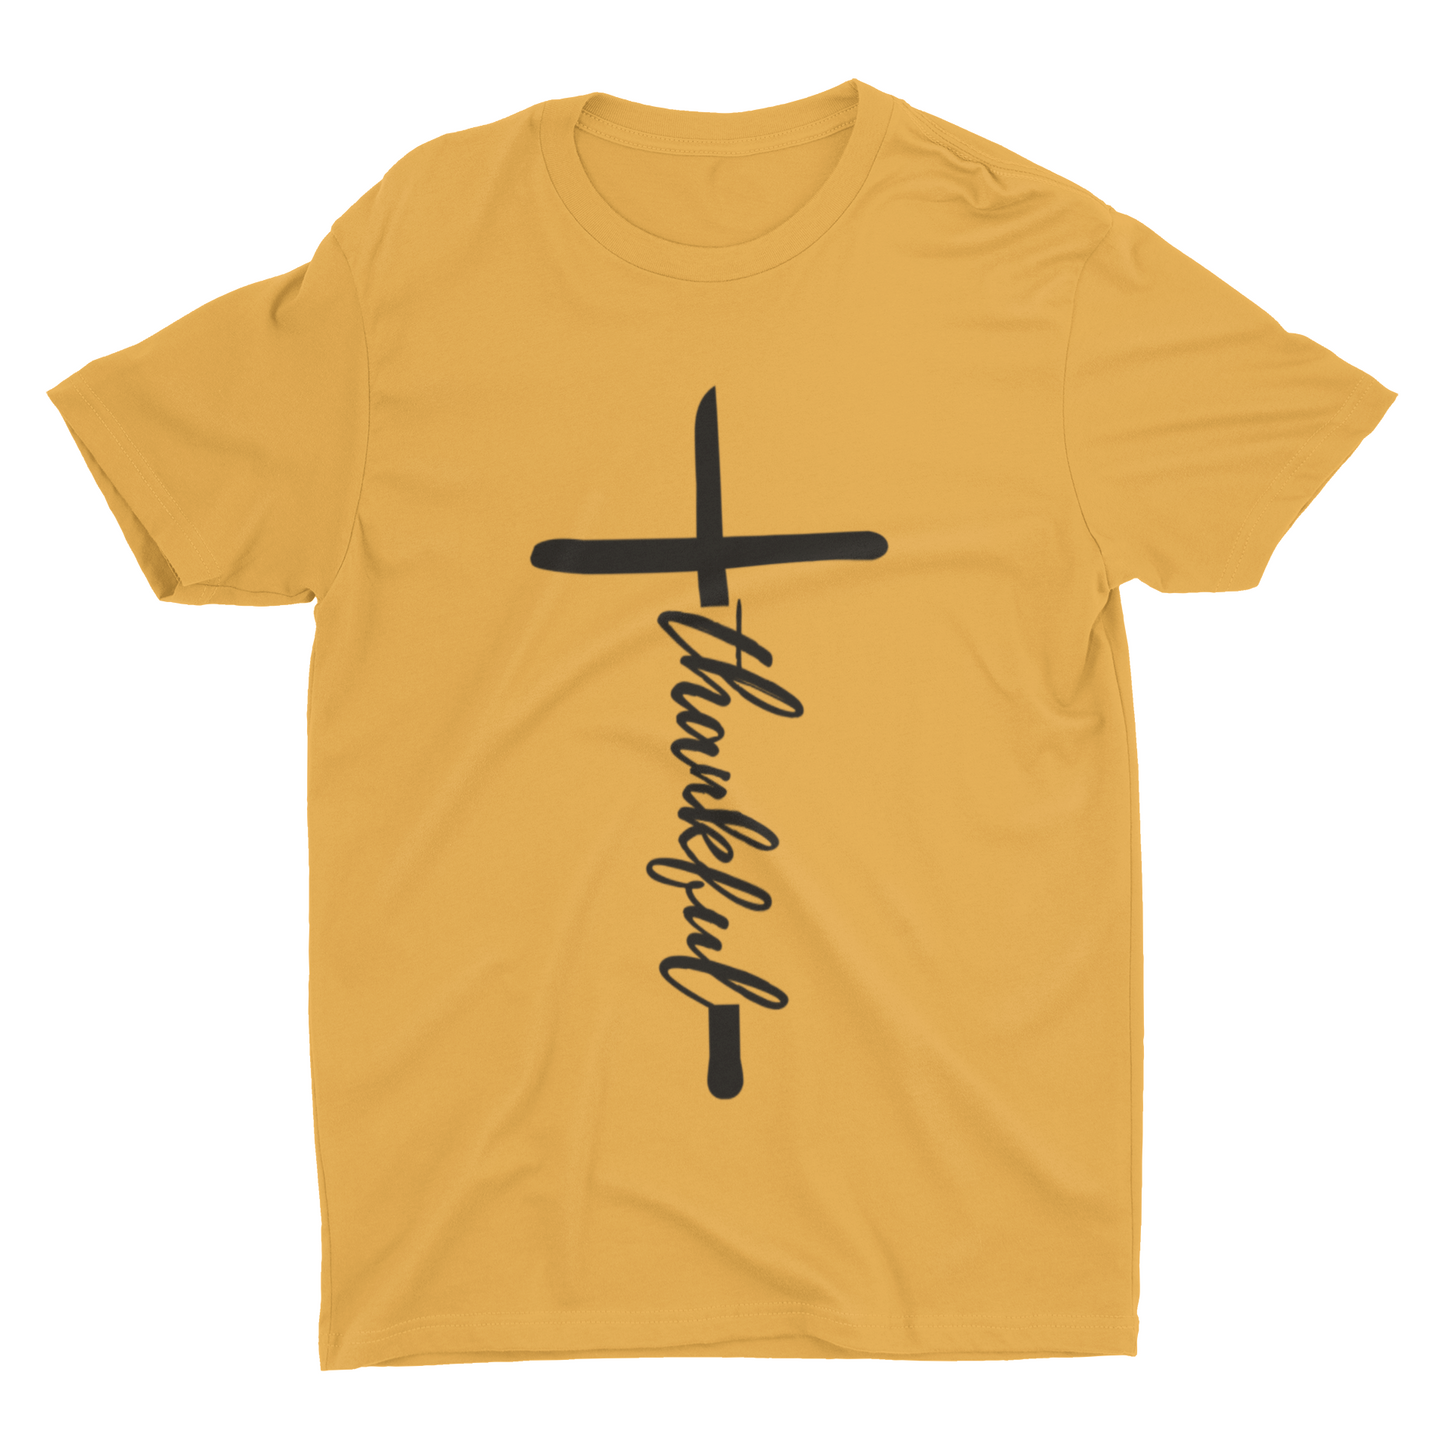 Thankful cross graphic t-shirt for fall